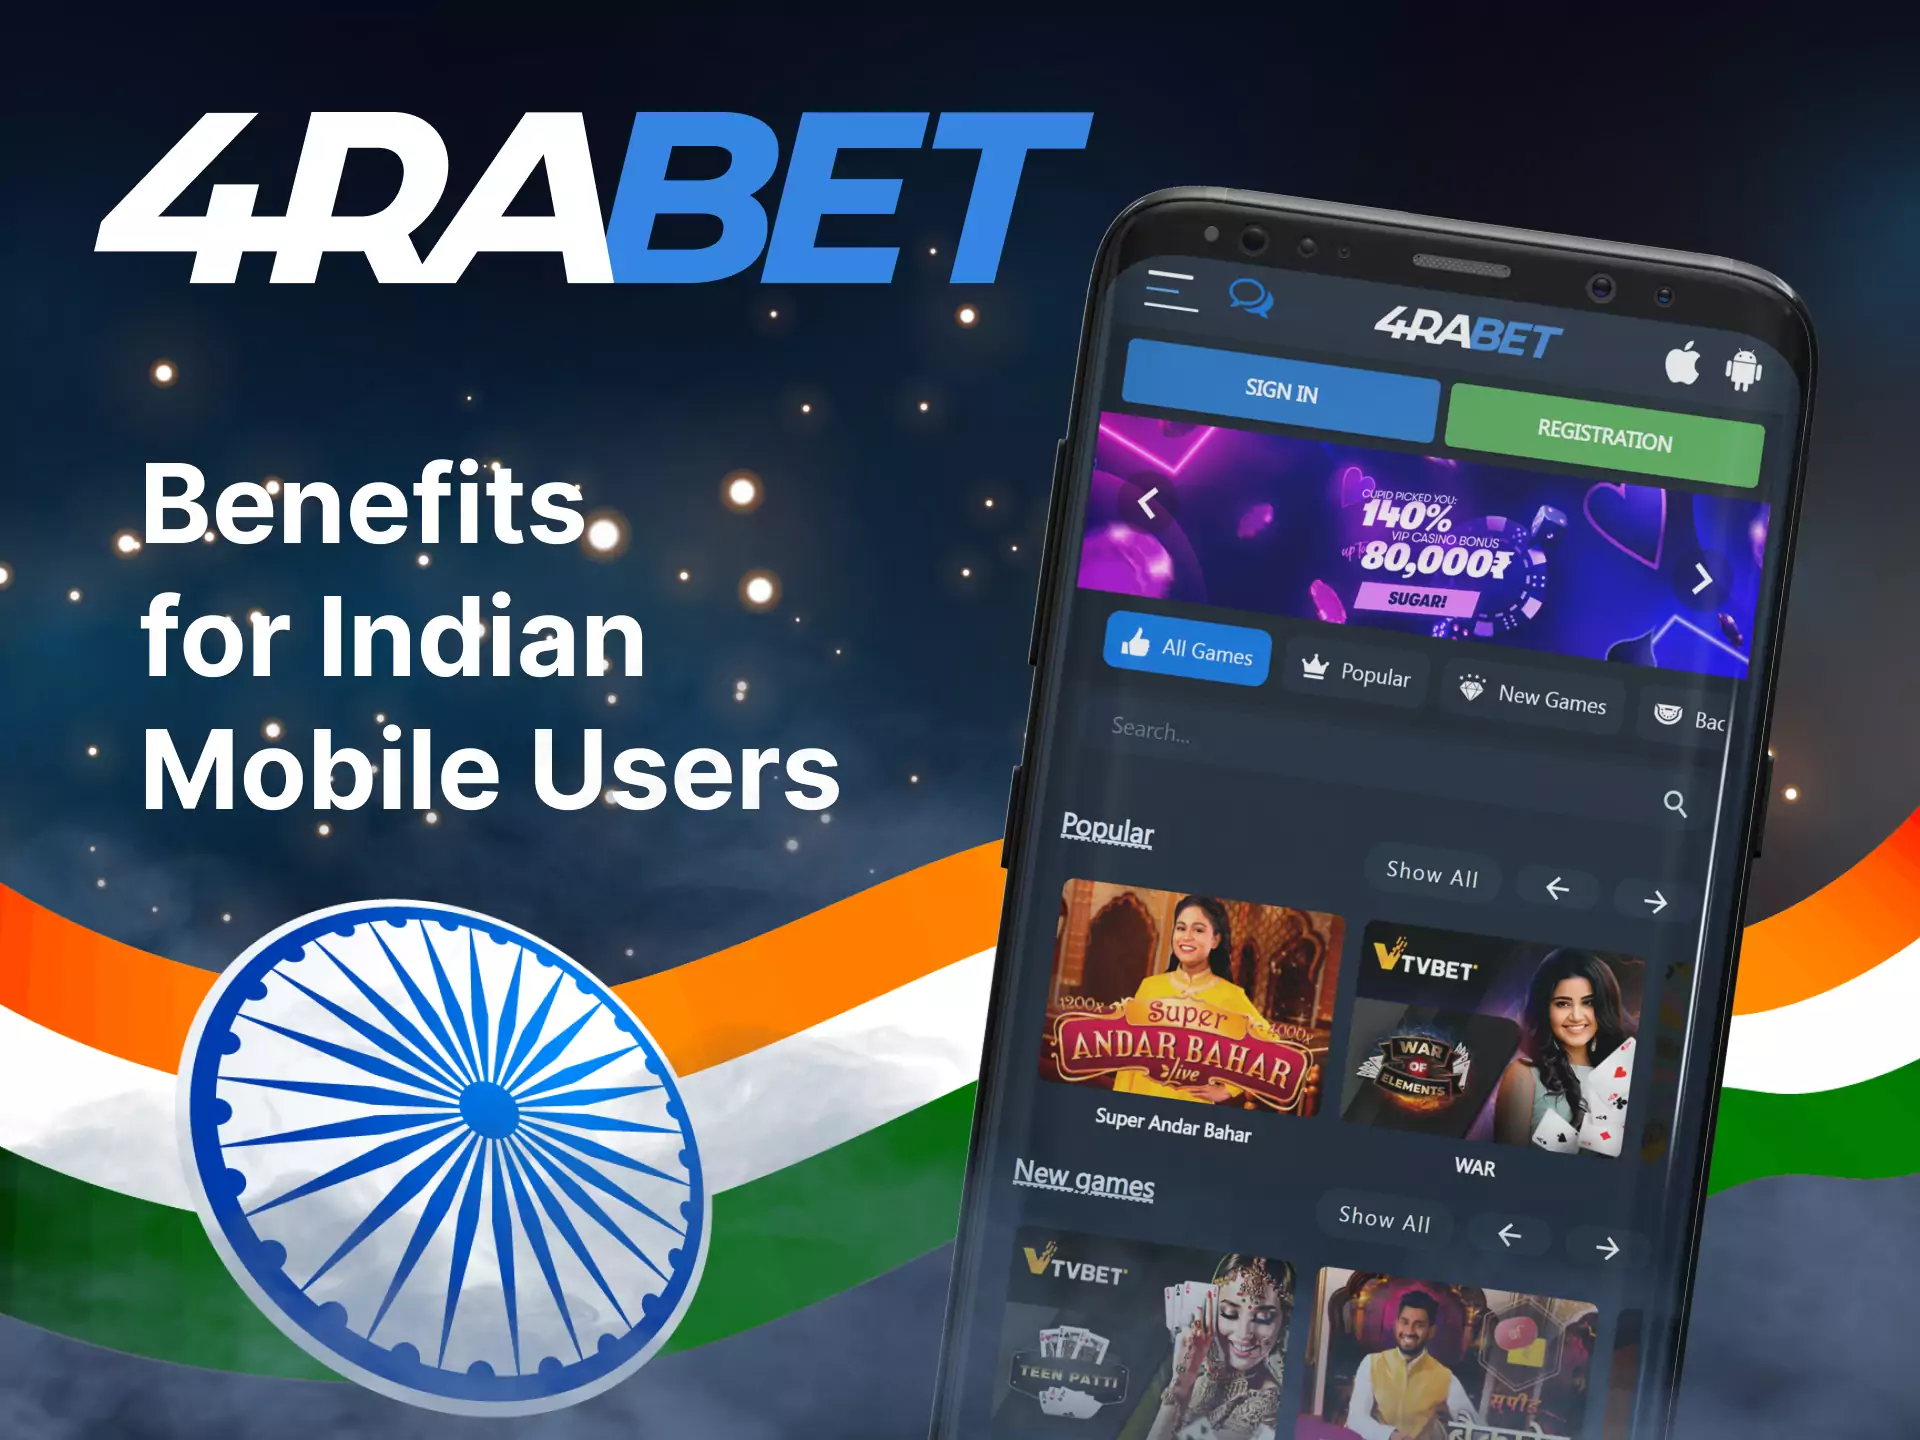 4rabet offers many benefits to mobile app users from India.